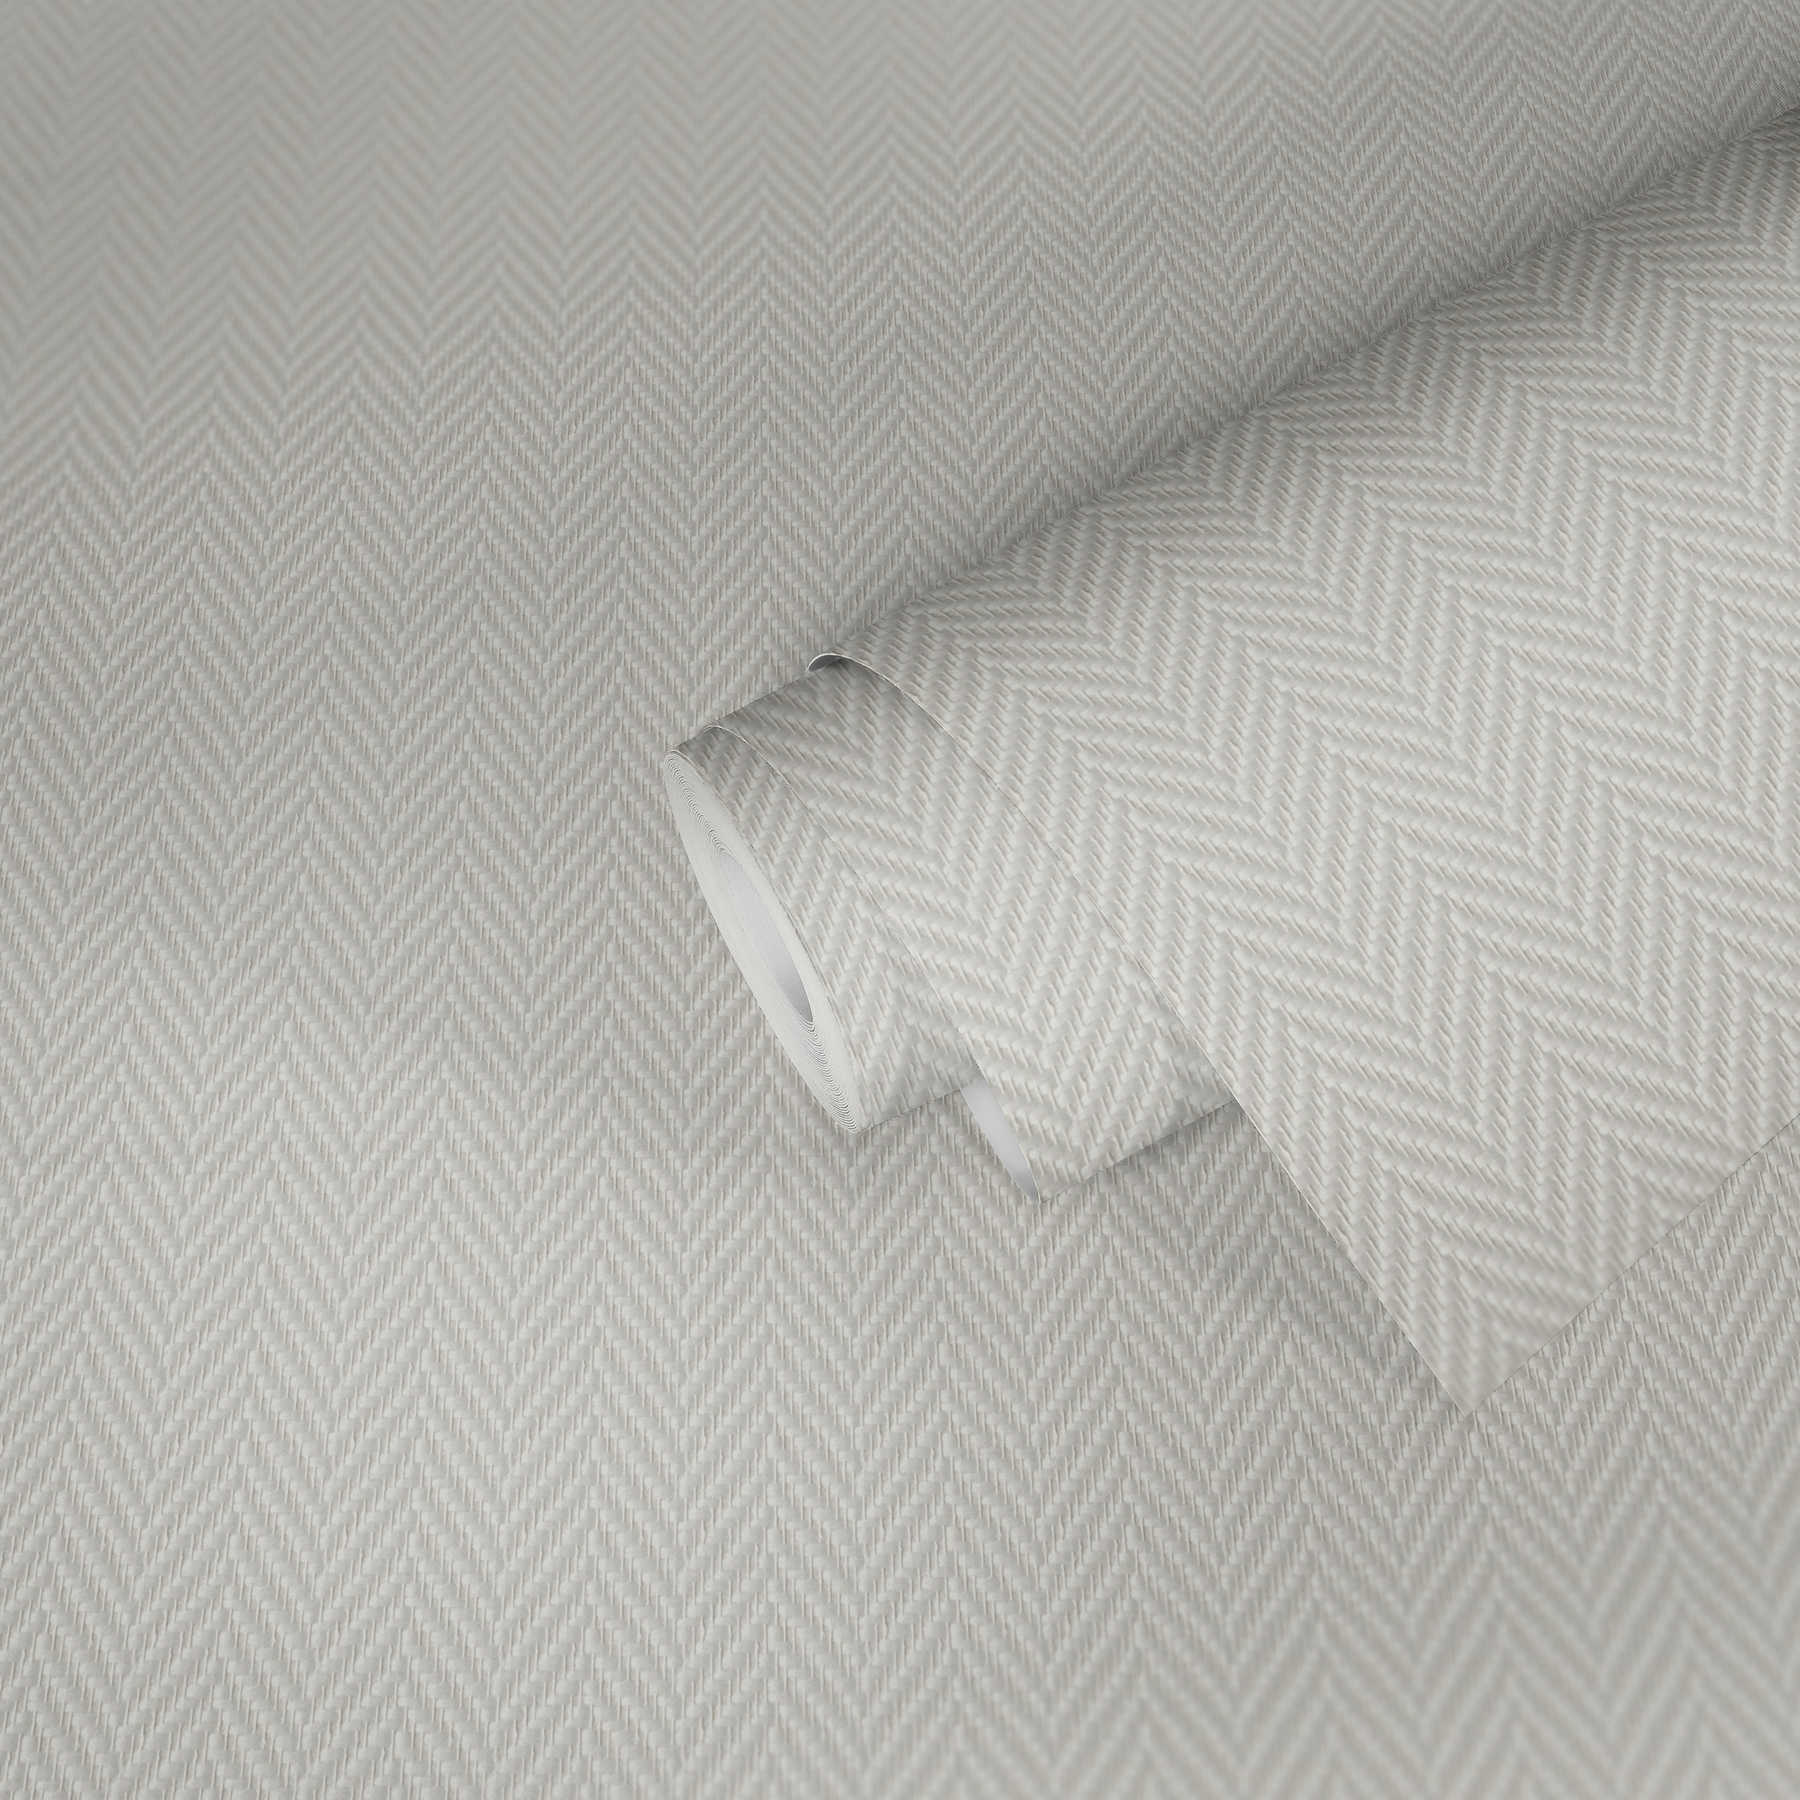             Glass fibre wallpaper with herringbone pattern - dimensionally stable, can be painted over several times
        